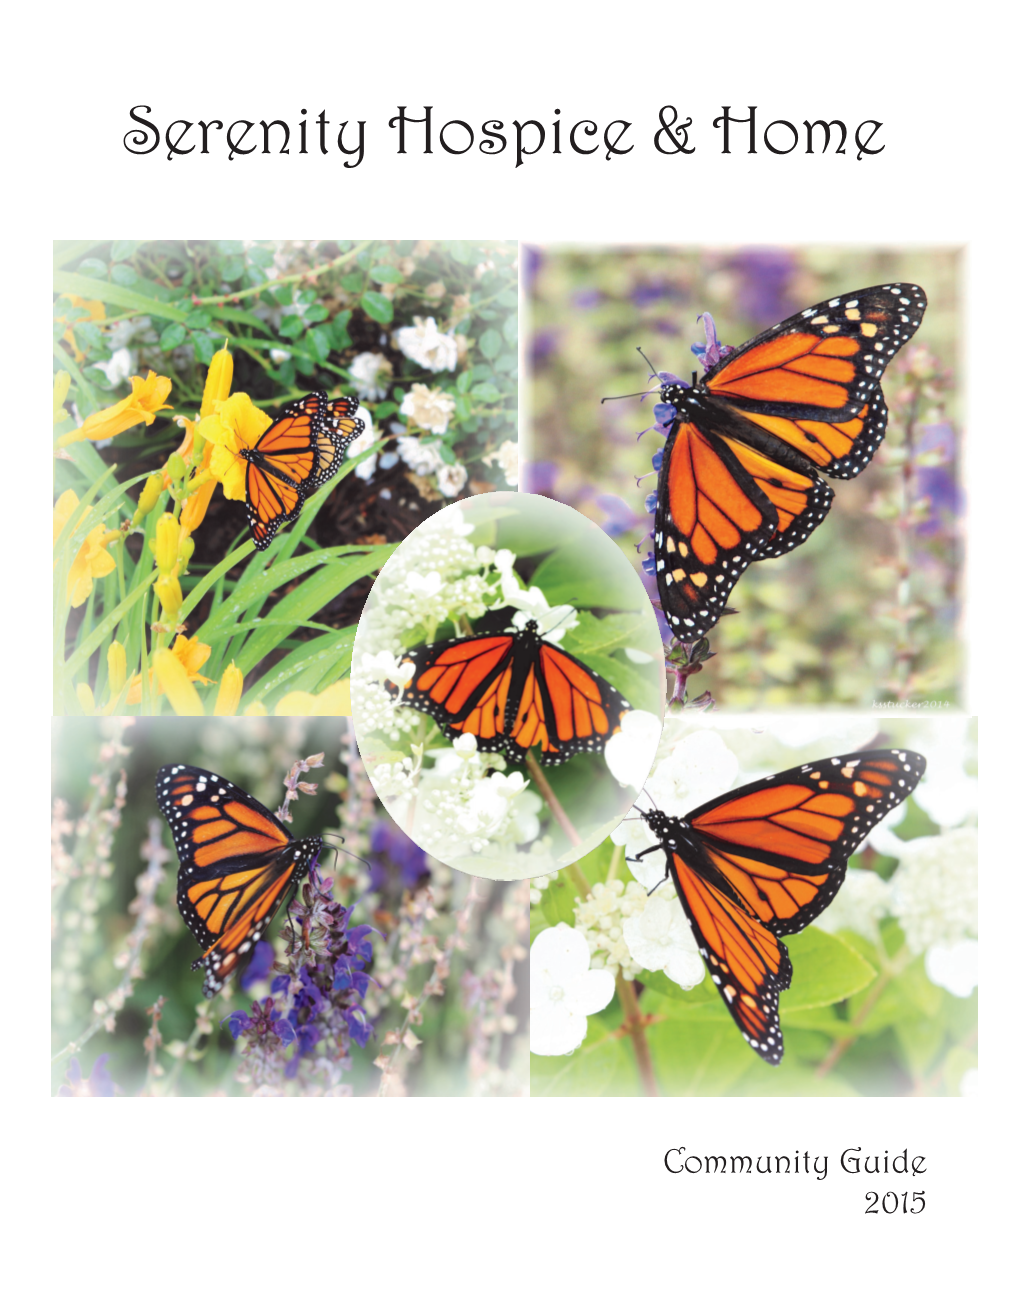 Community Guide 2015 Believing in the Dignity of Life, Serenity Hospice and Home Offers Care to the Terminally Ill and Their Families